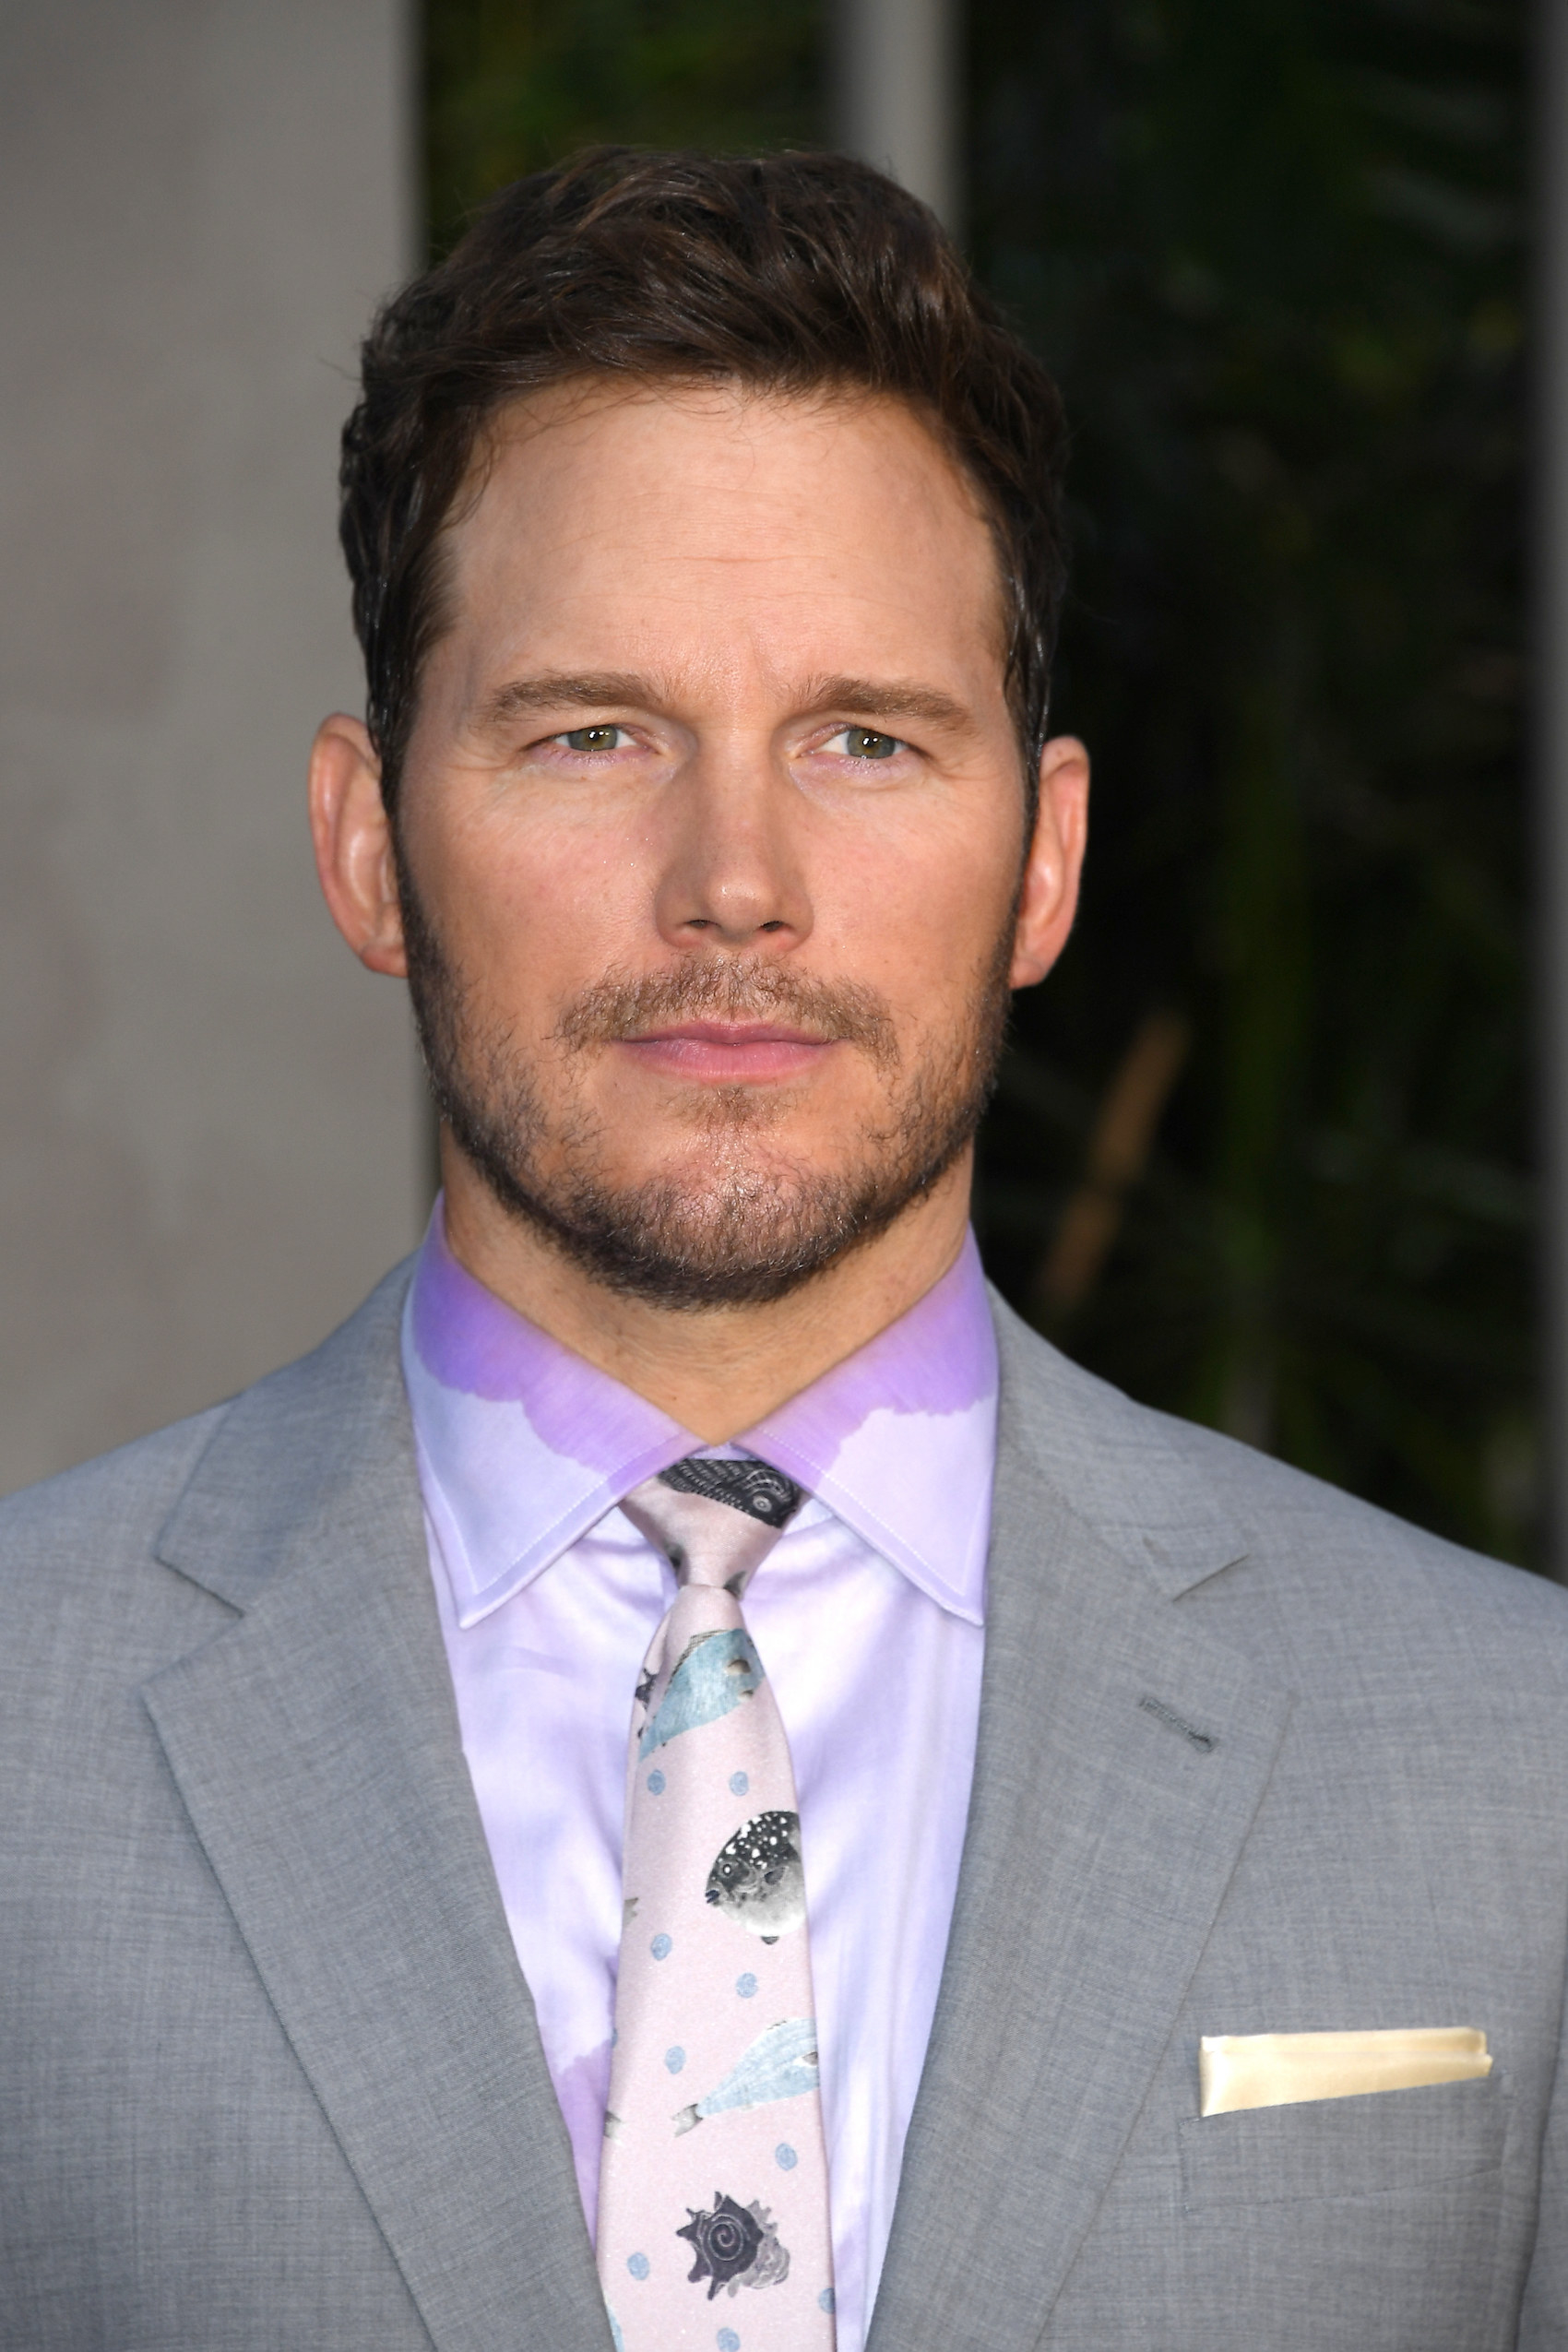 Chris Pratt Swore Never to Try Marvel Again After Failed 'Thor' Audition